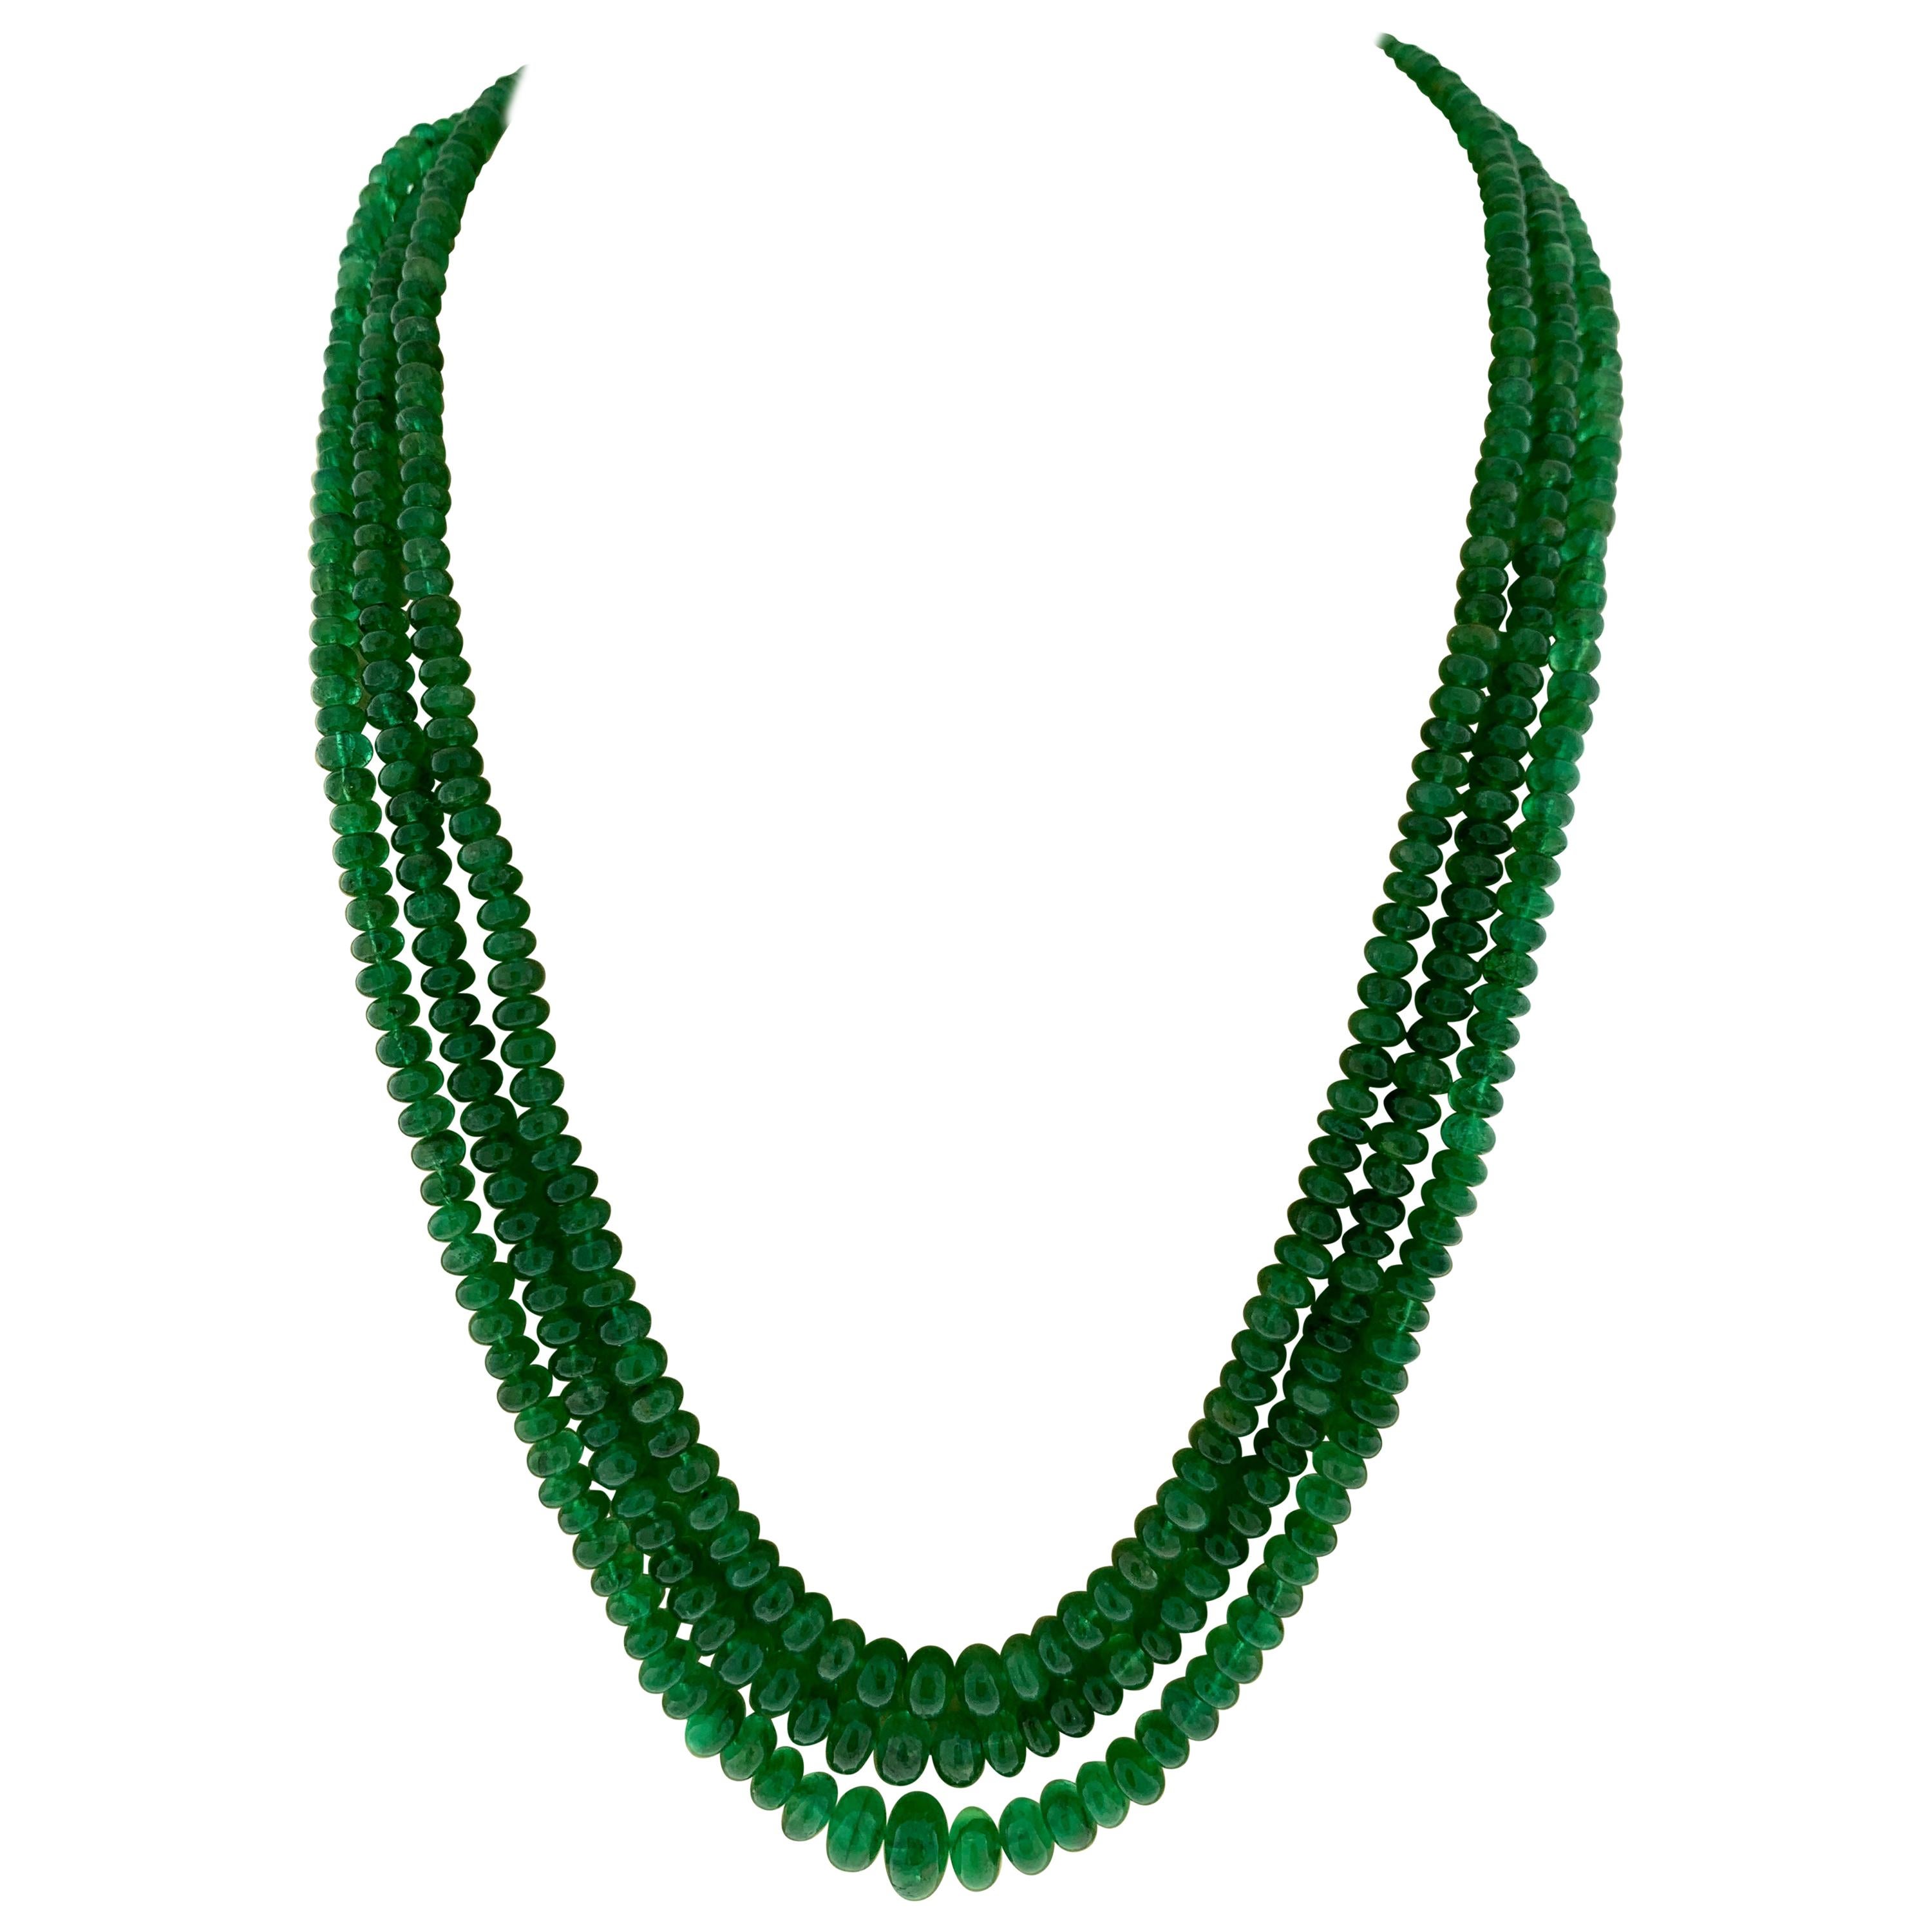 155 Carat 3 Layer Brazilian Emerald Bead Necklace Sterling Silver Clasp